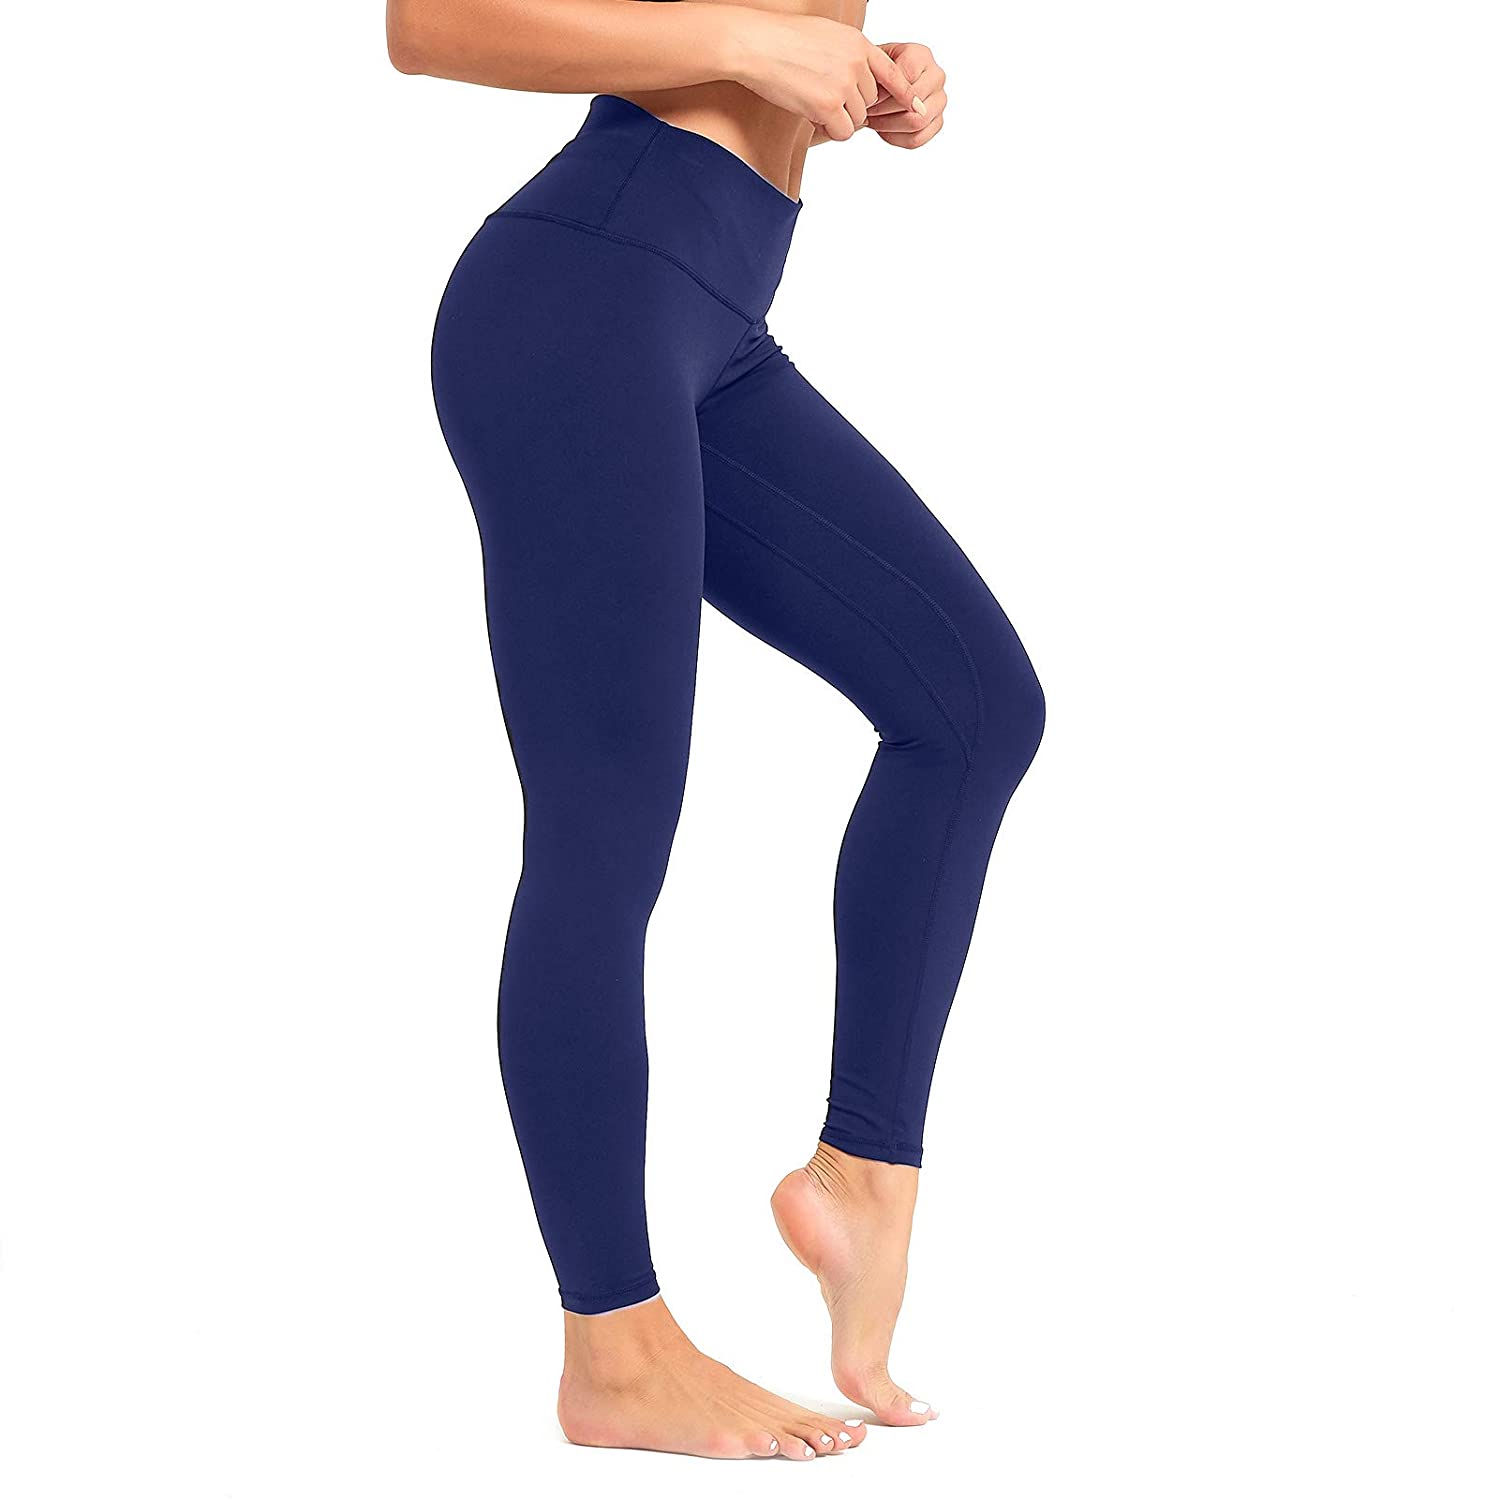 SP3LOPS Yoga Pants with Pockets for Women High Waisted Tummy Control Women's Buttery Soft Yoga Workout Leggings Running Pants